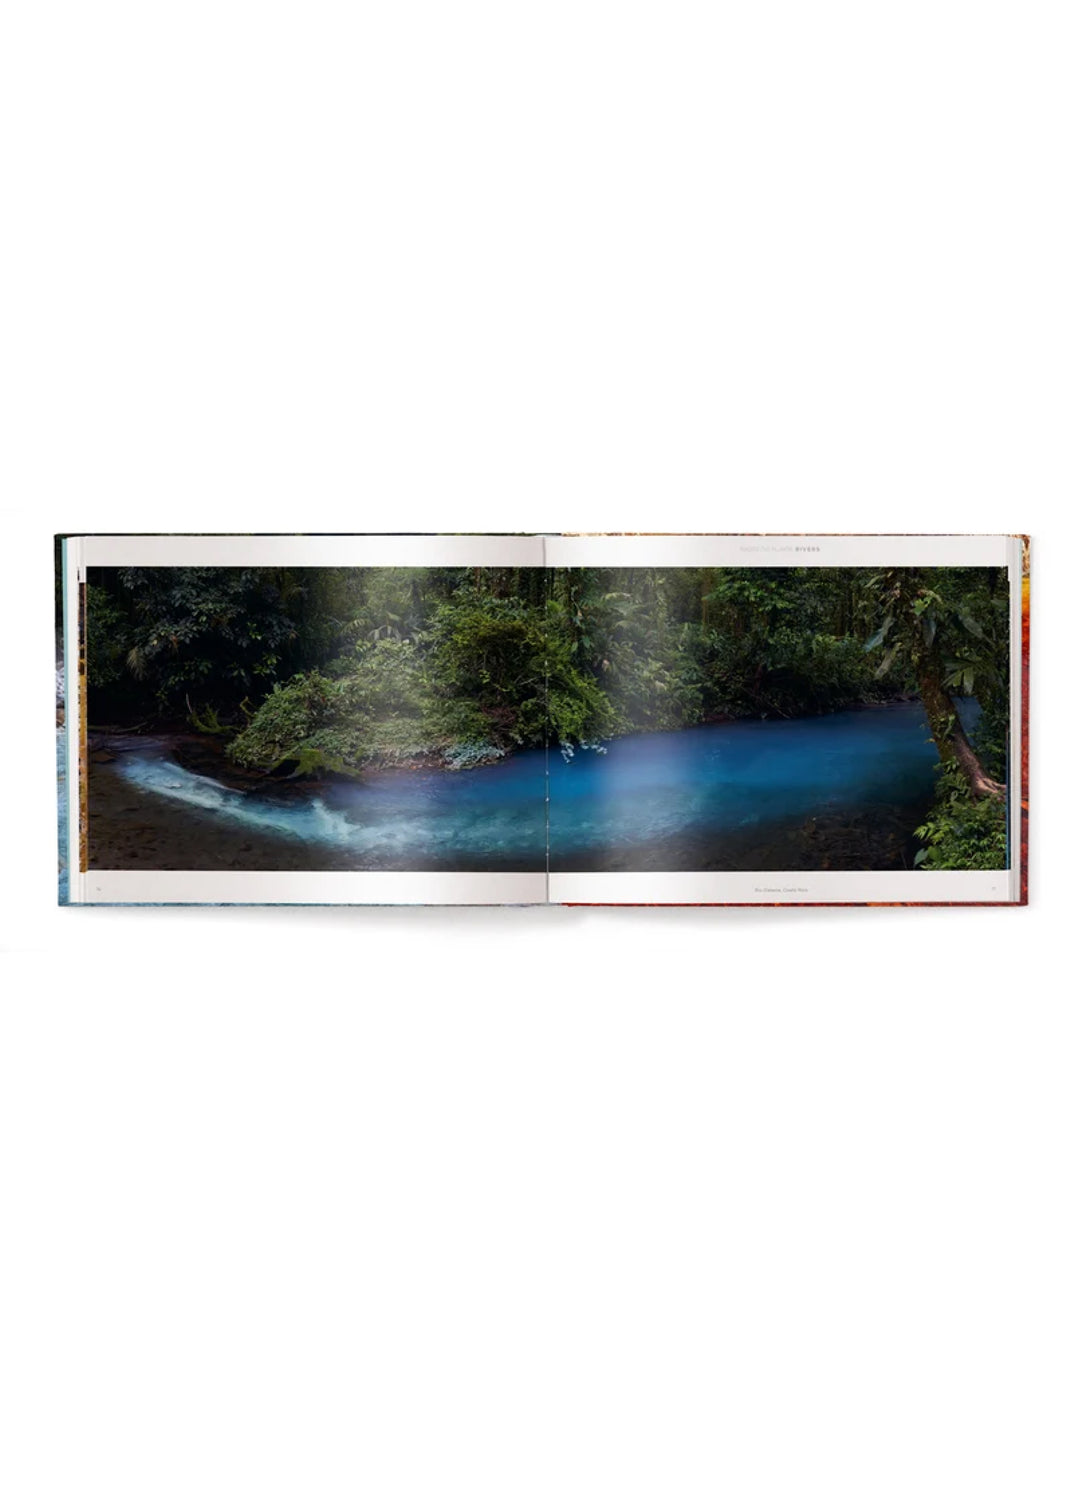 Water Coffee Table Book